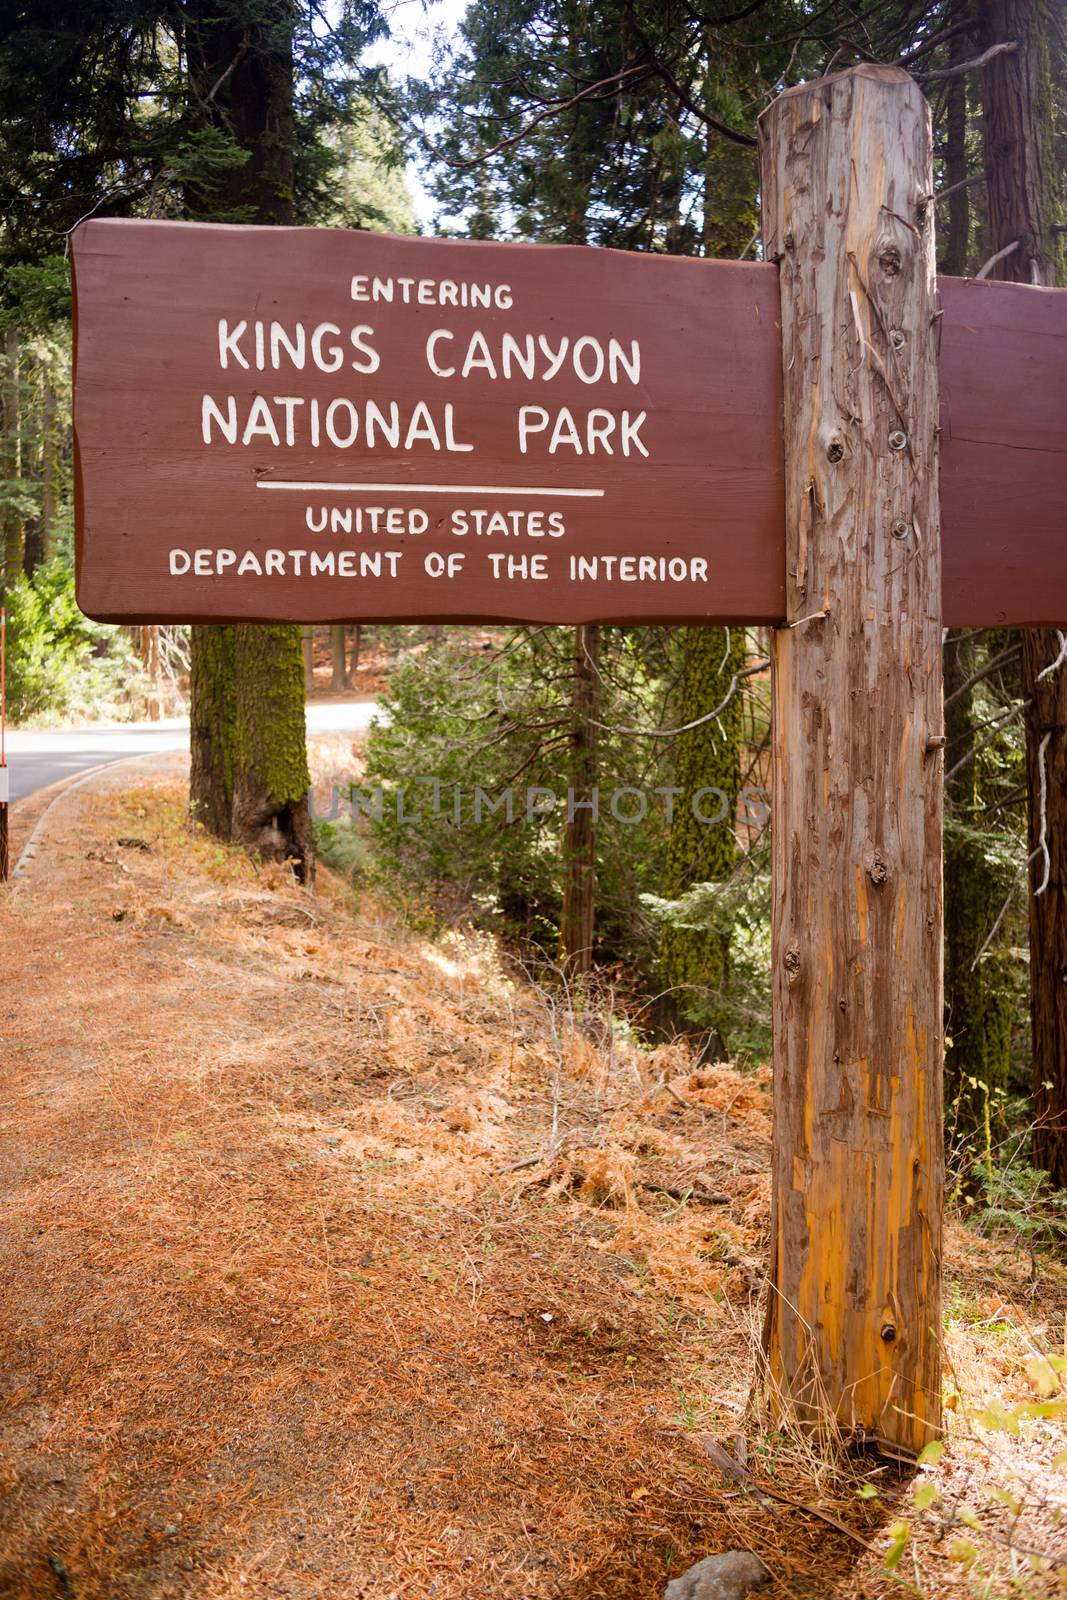 A beautiful sign showing the entrance to Kings Canyon